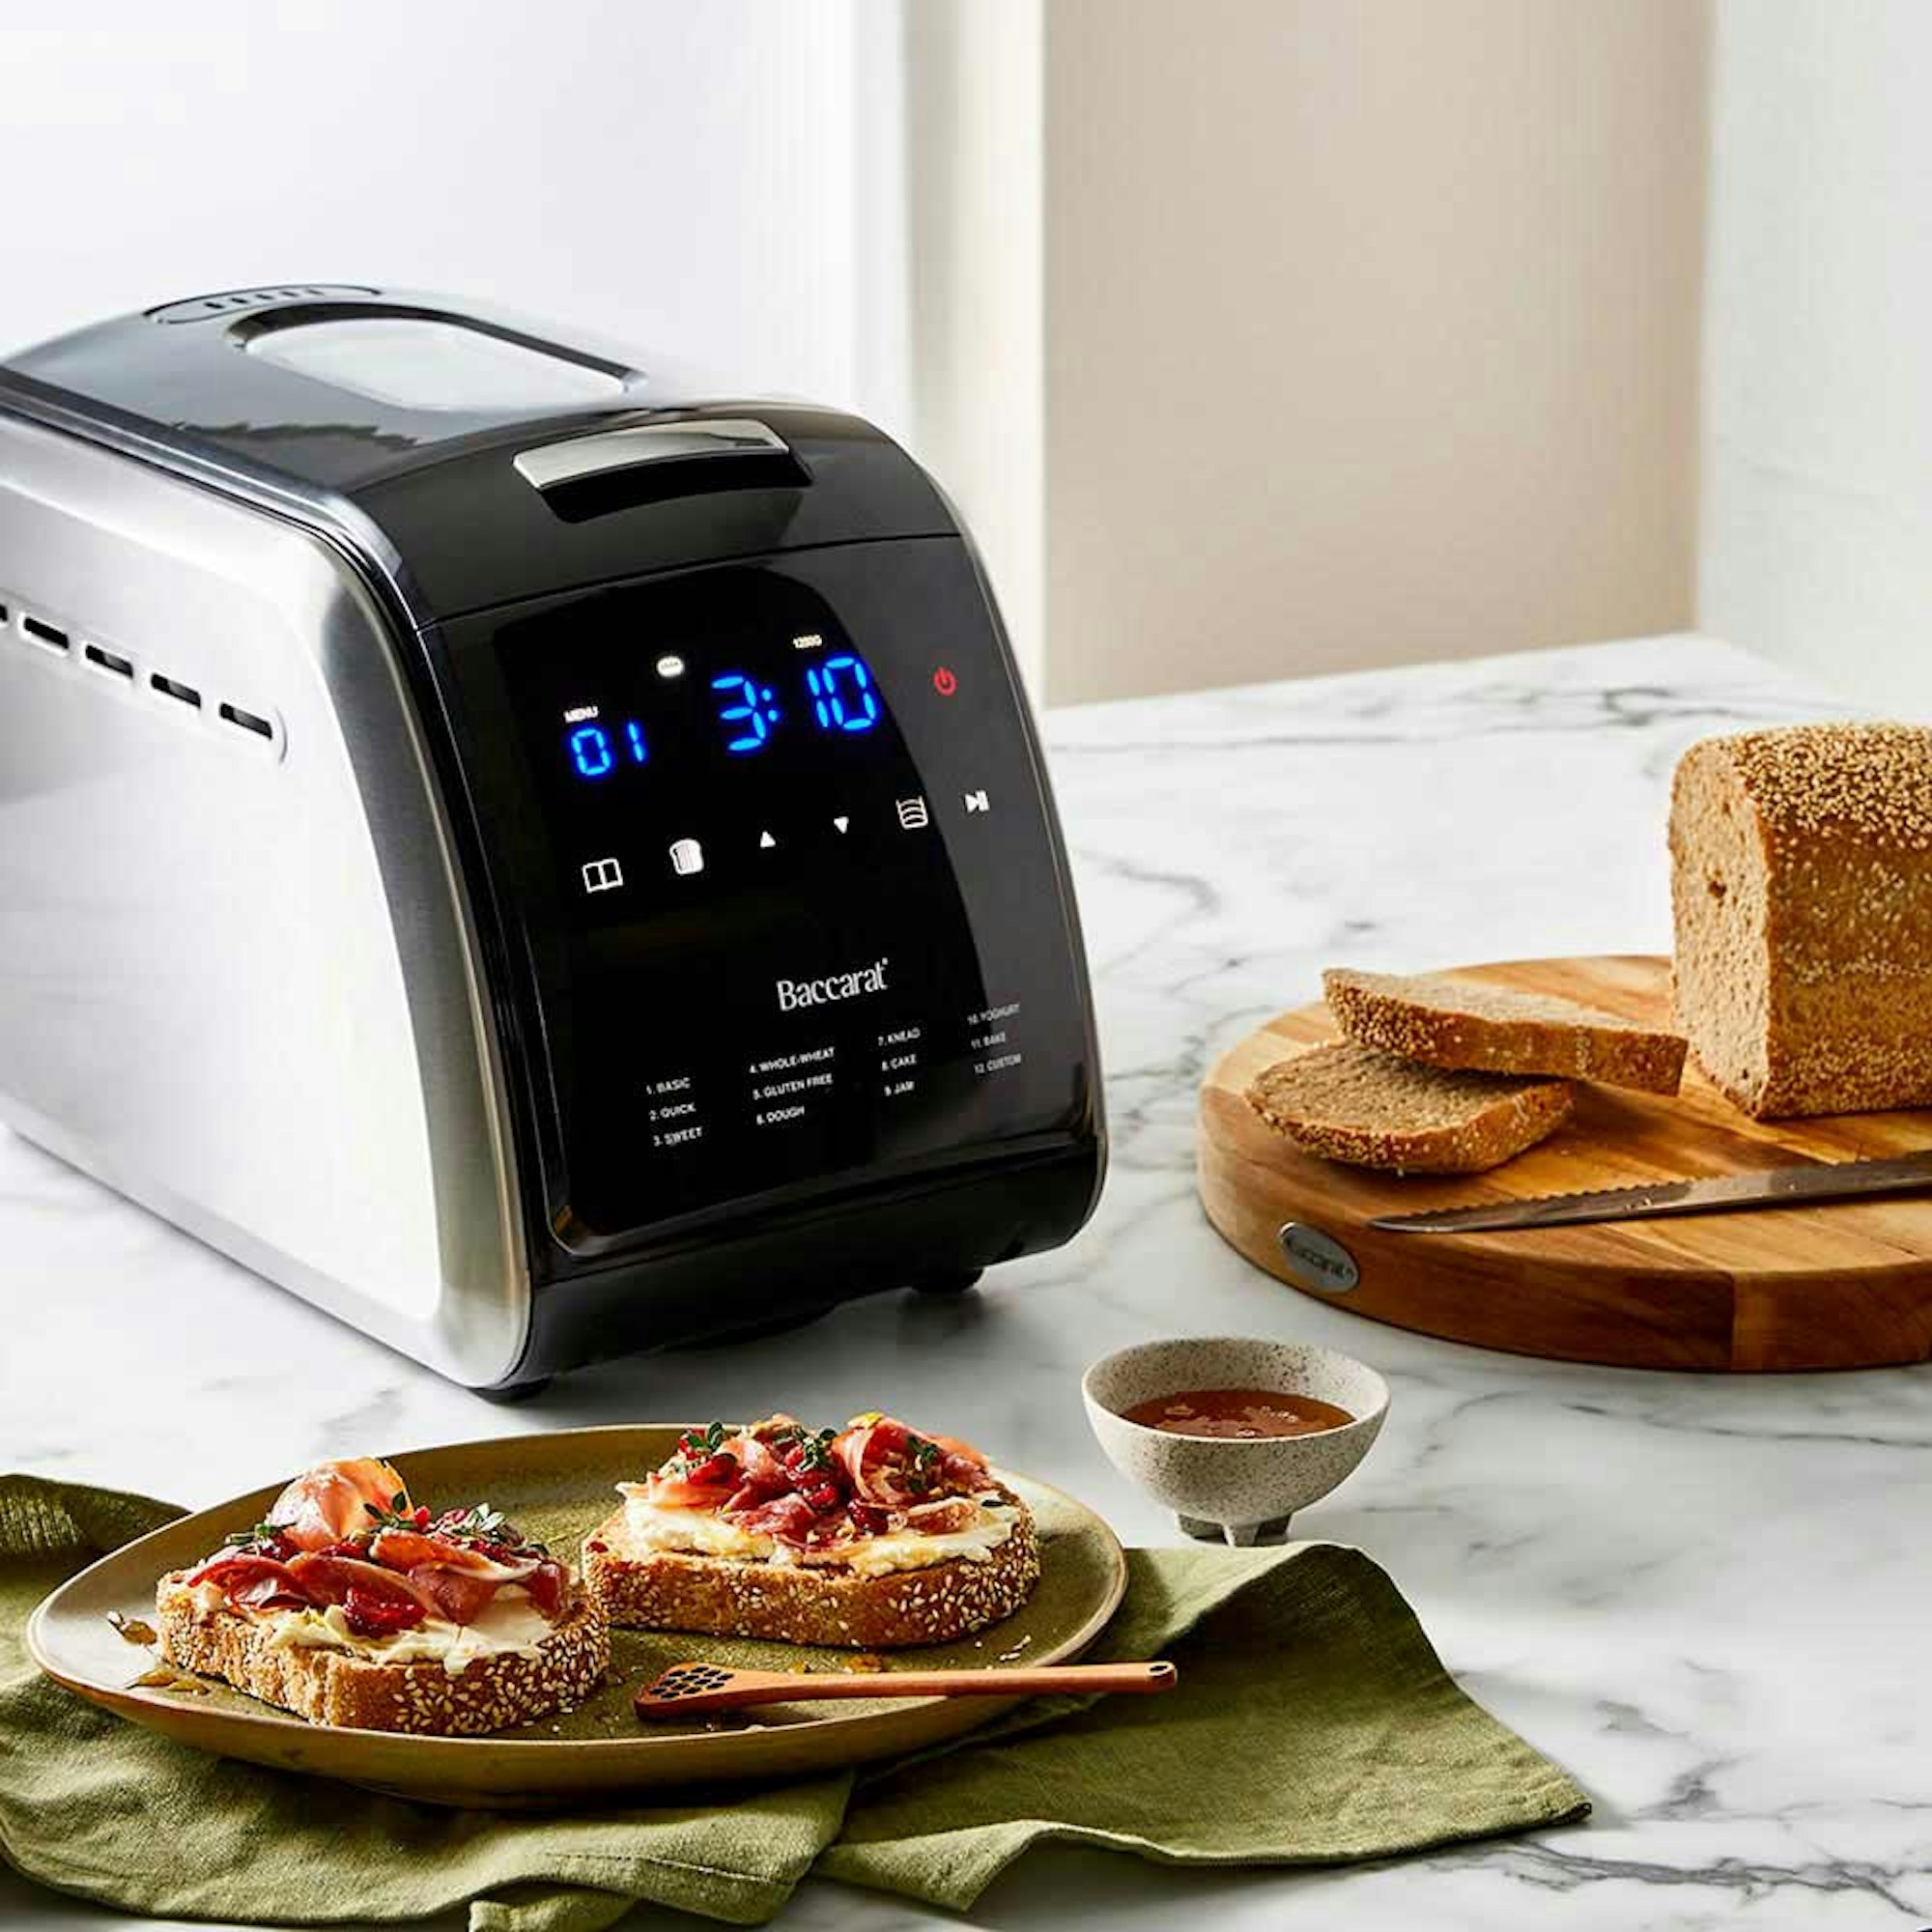 Baccarat The Ultimate Loaf Bread Maker. Mother's day gift guide.